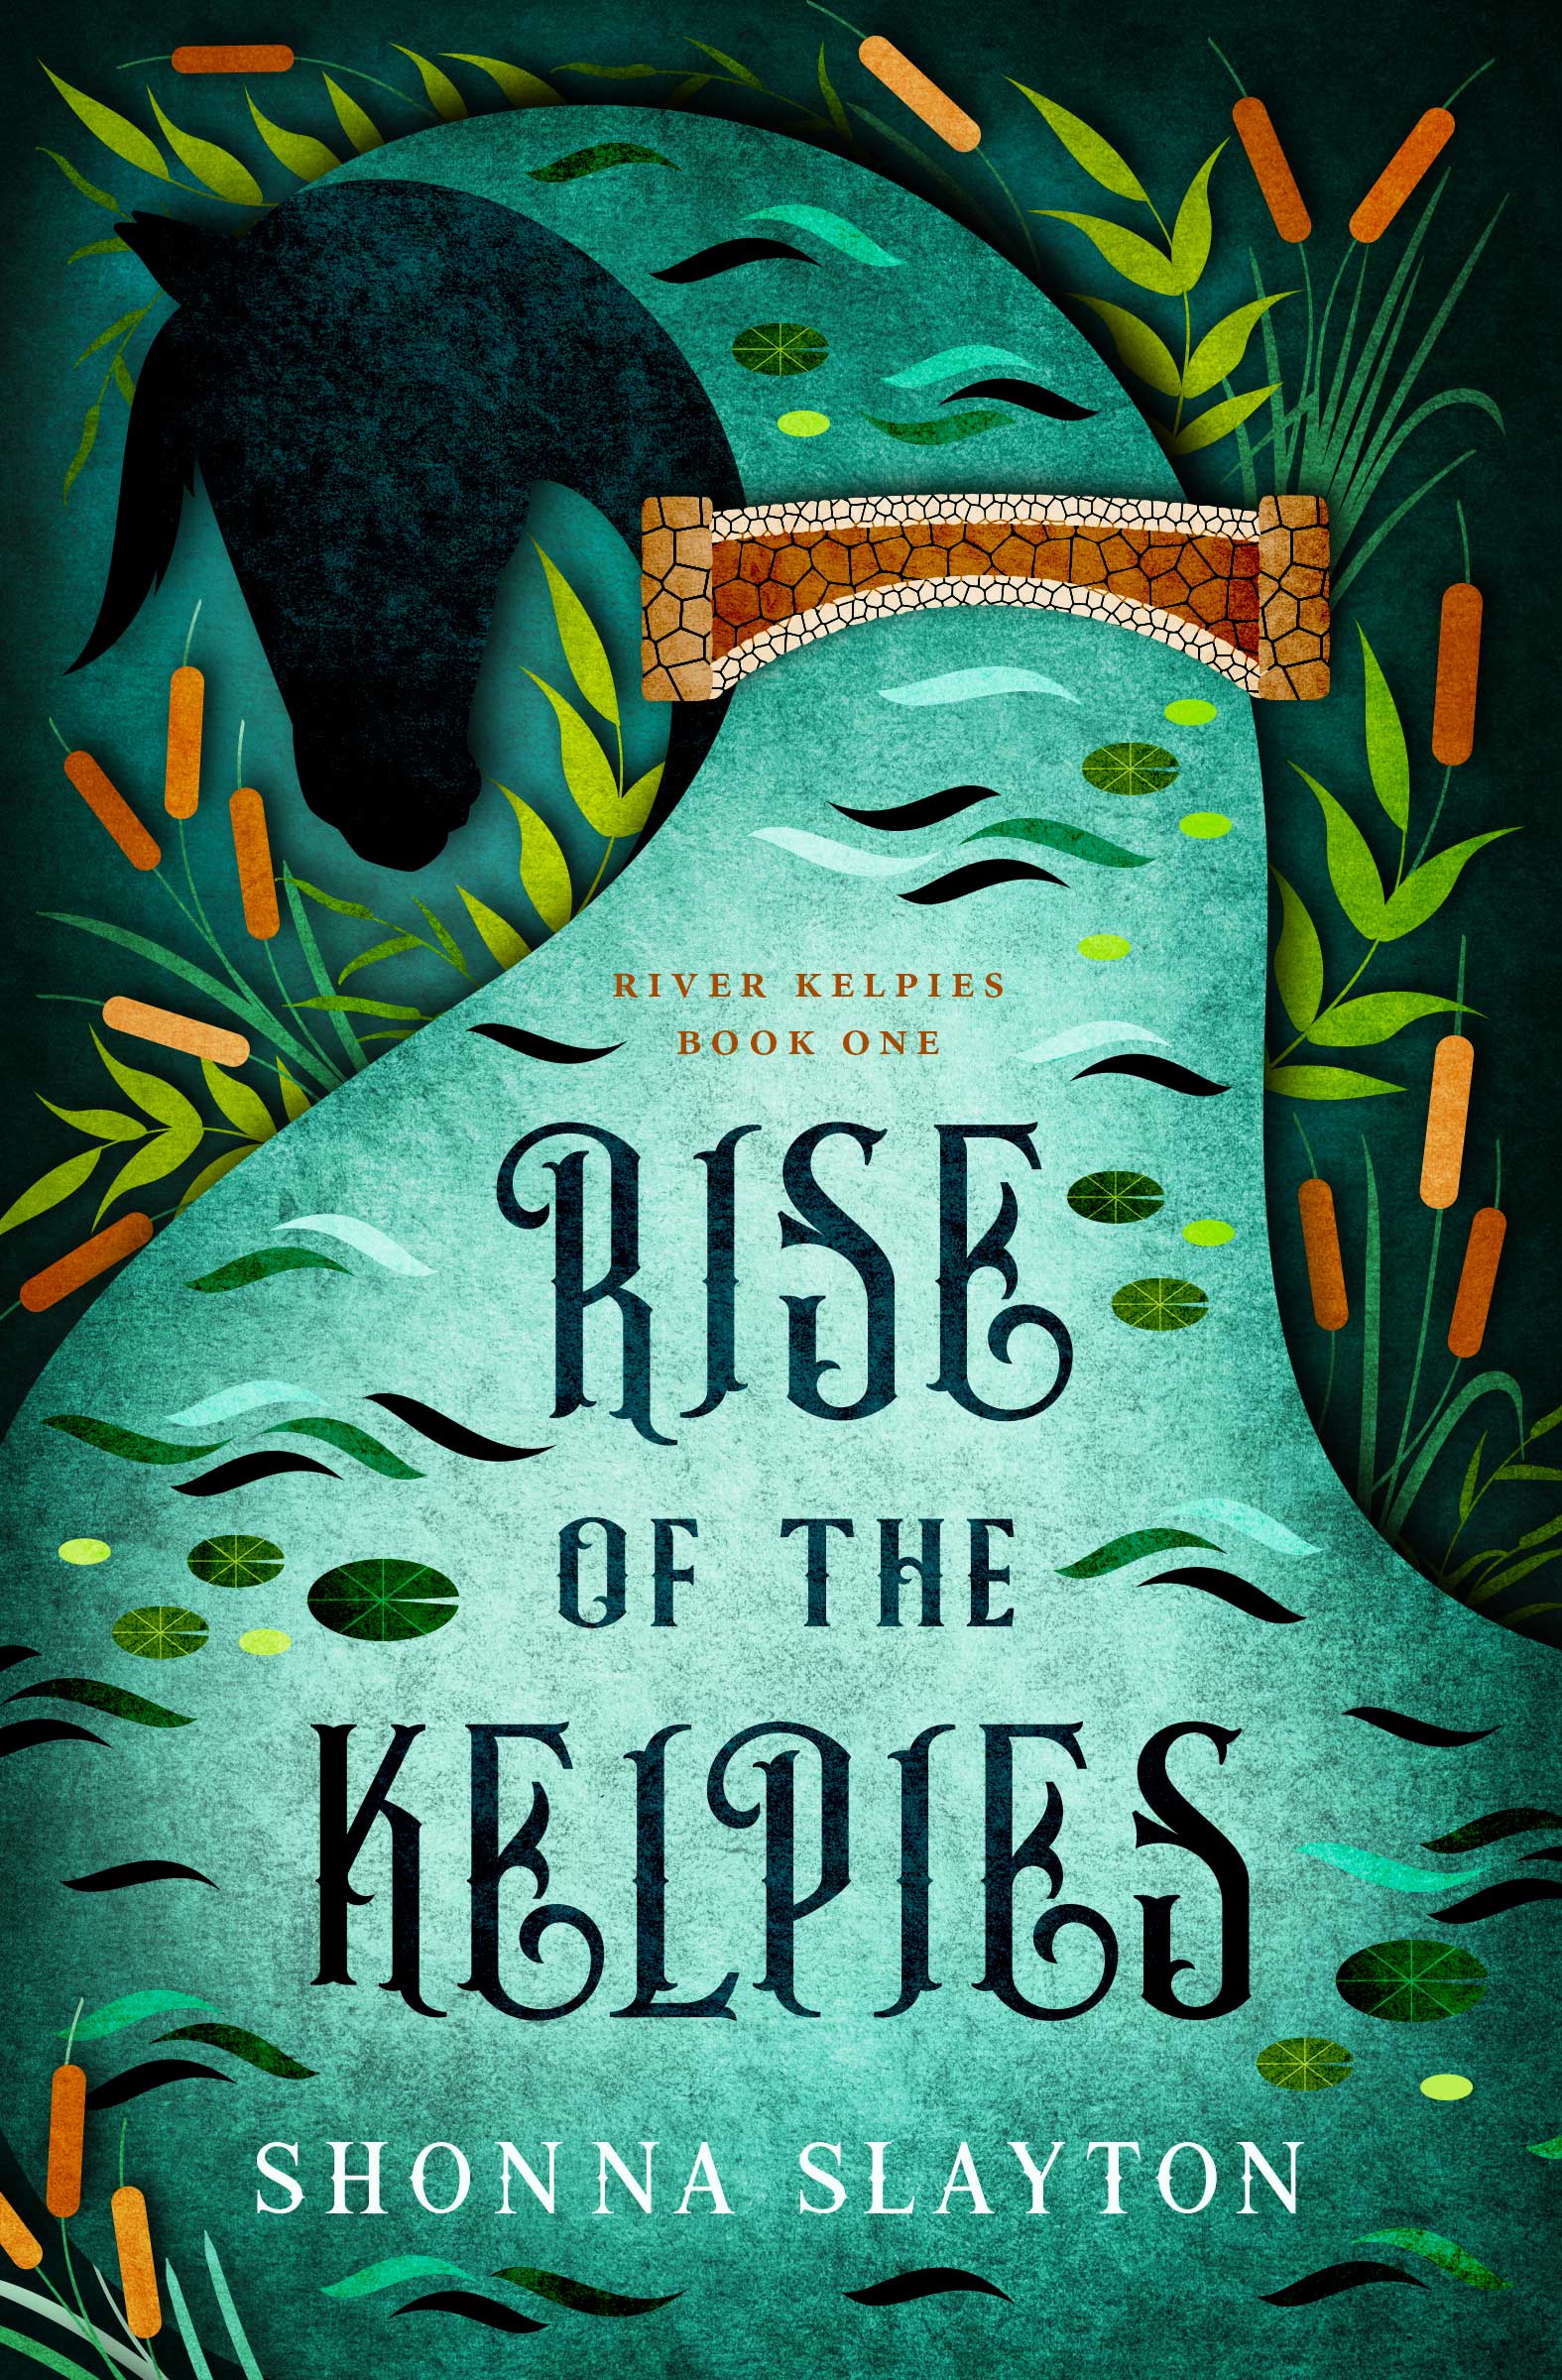 Book cover of The Rise of the Kelpies, showing a horse's head, a bridge and a river. 
